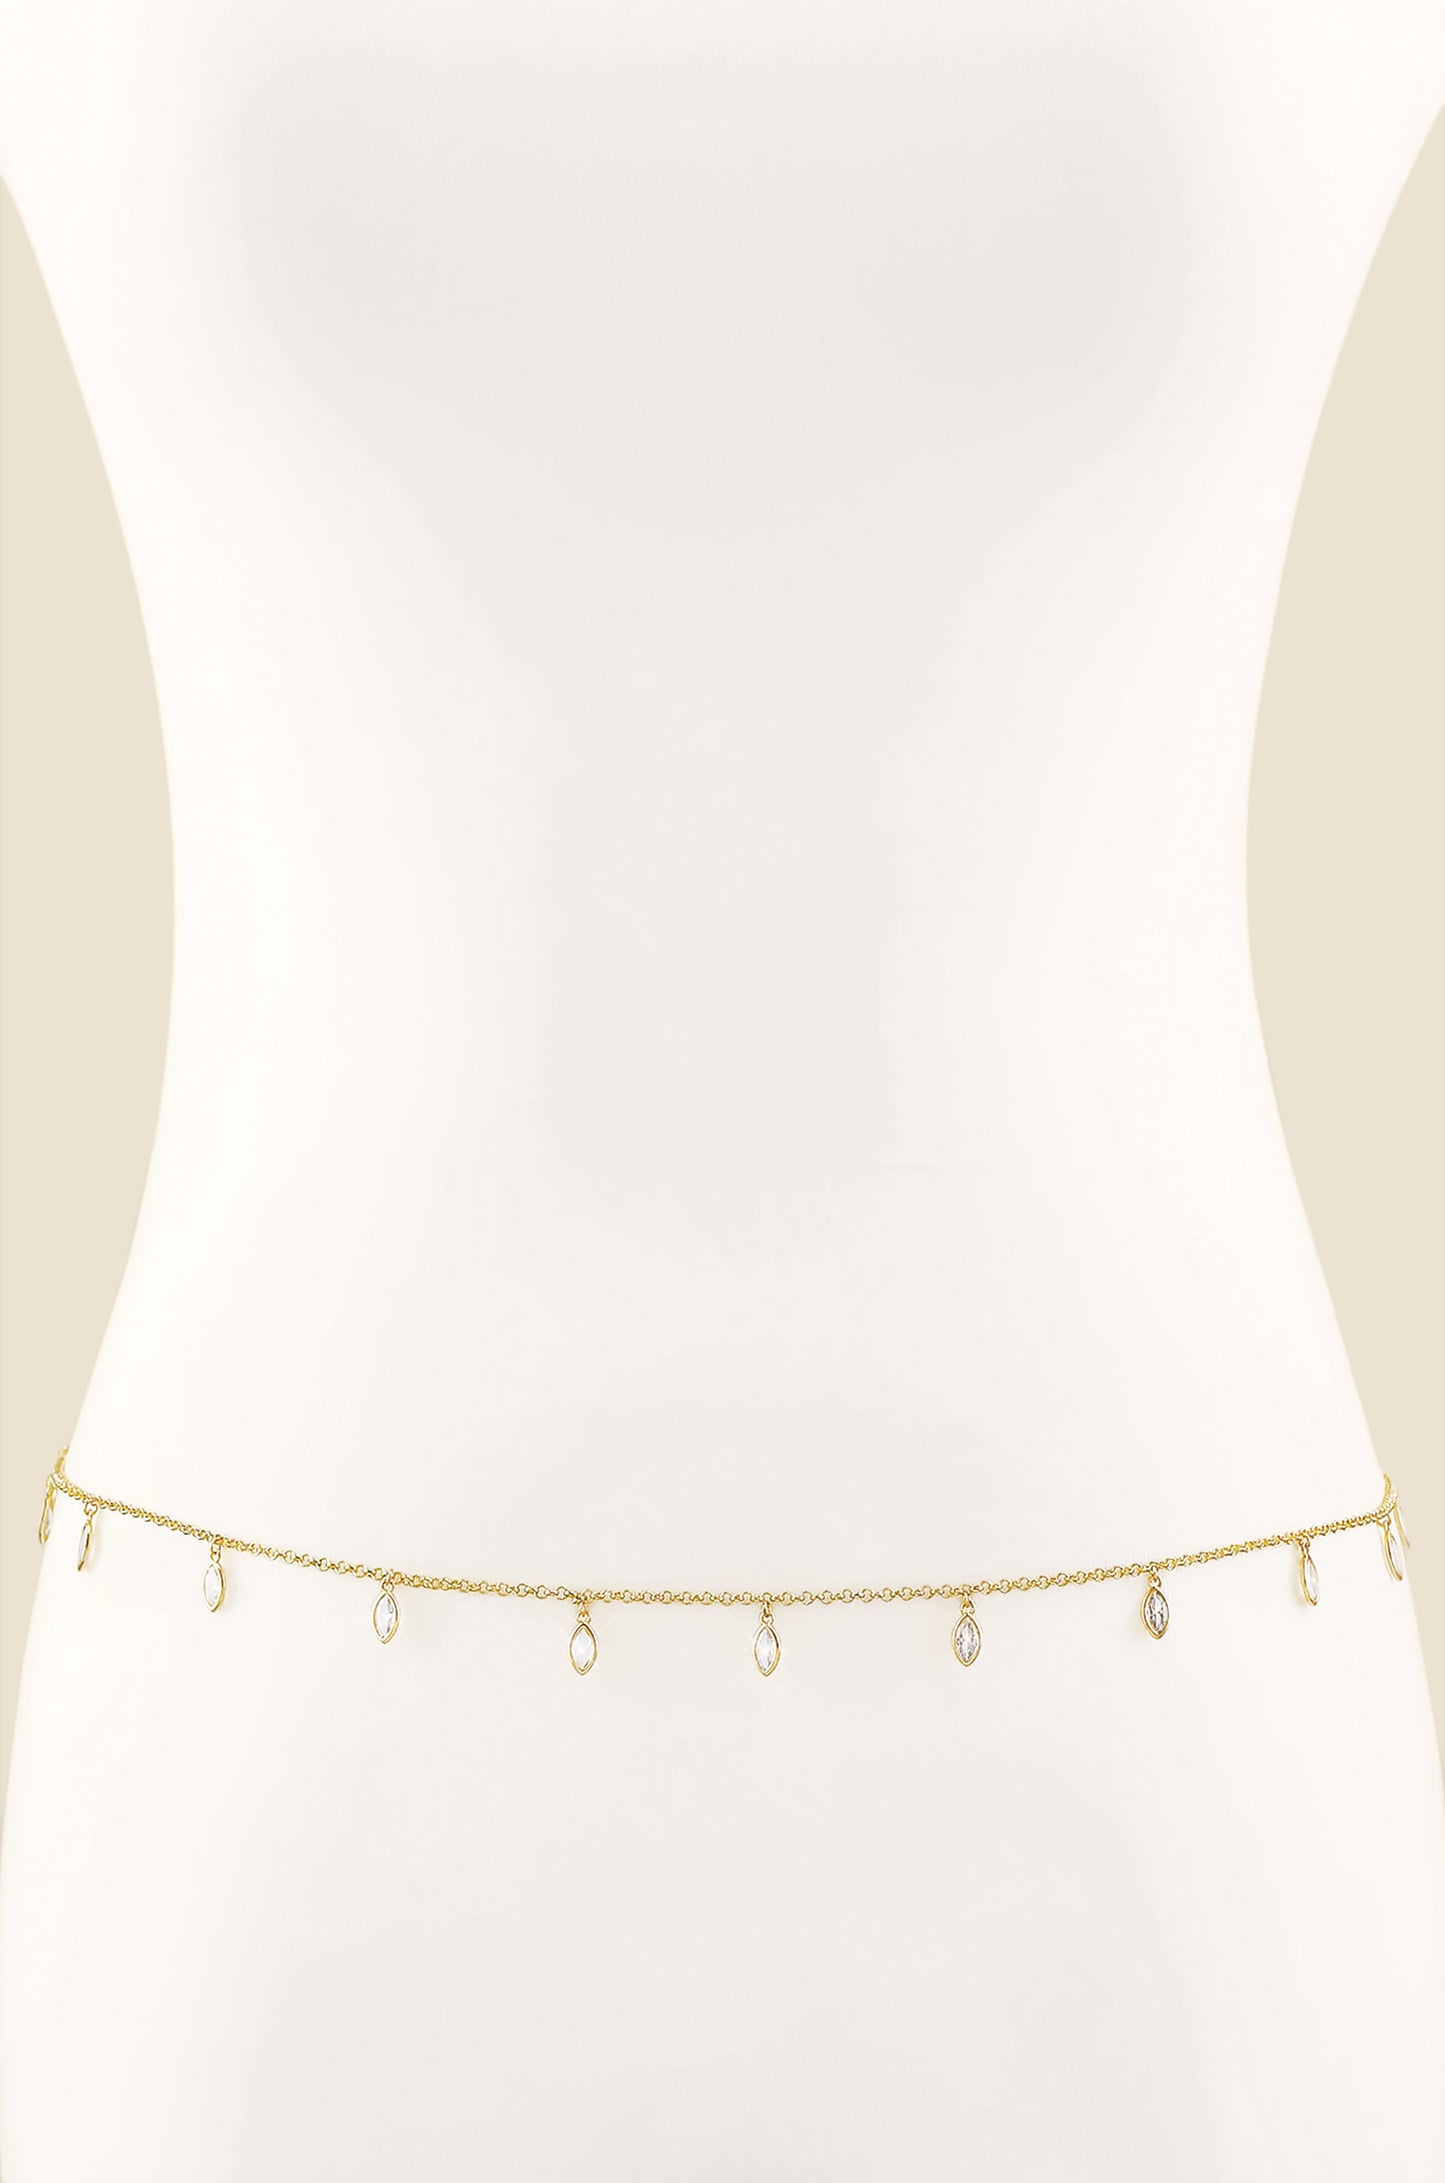 Crystal Droplet Thin Chain Gold Body Chain front